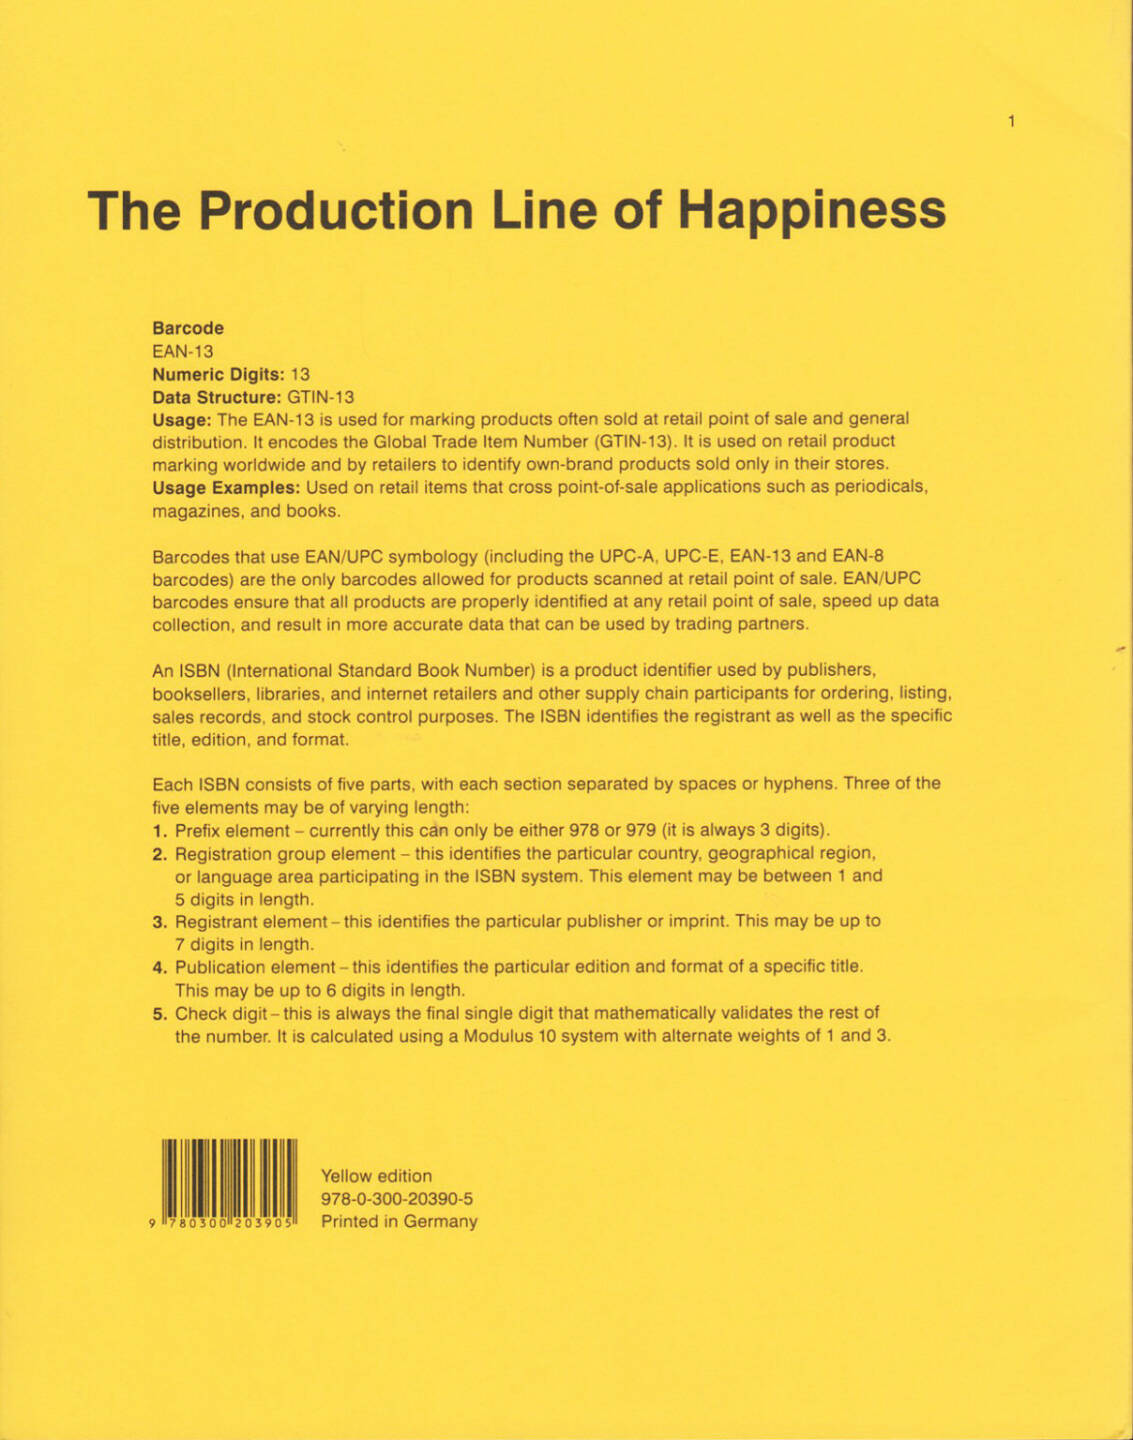 Christopher Williams - The Production Line of Happiness, Art Institute of Chicago 2014, Cover - http://josefchladek.com/book/christopher_williams_-_the_production_line_of_happiness